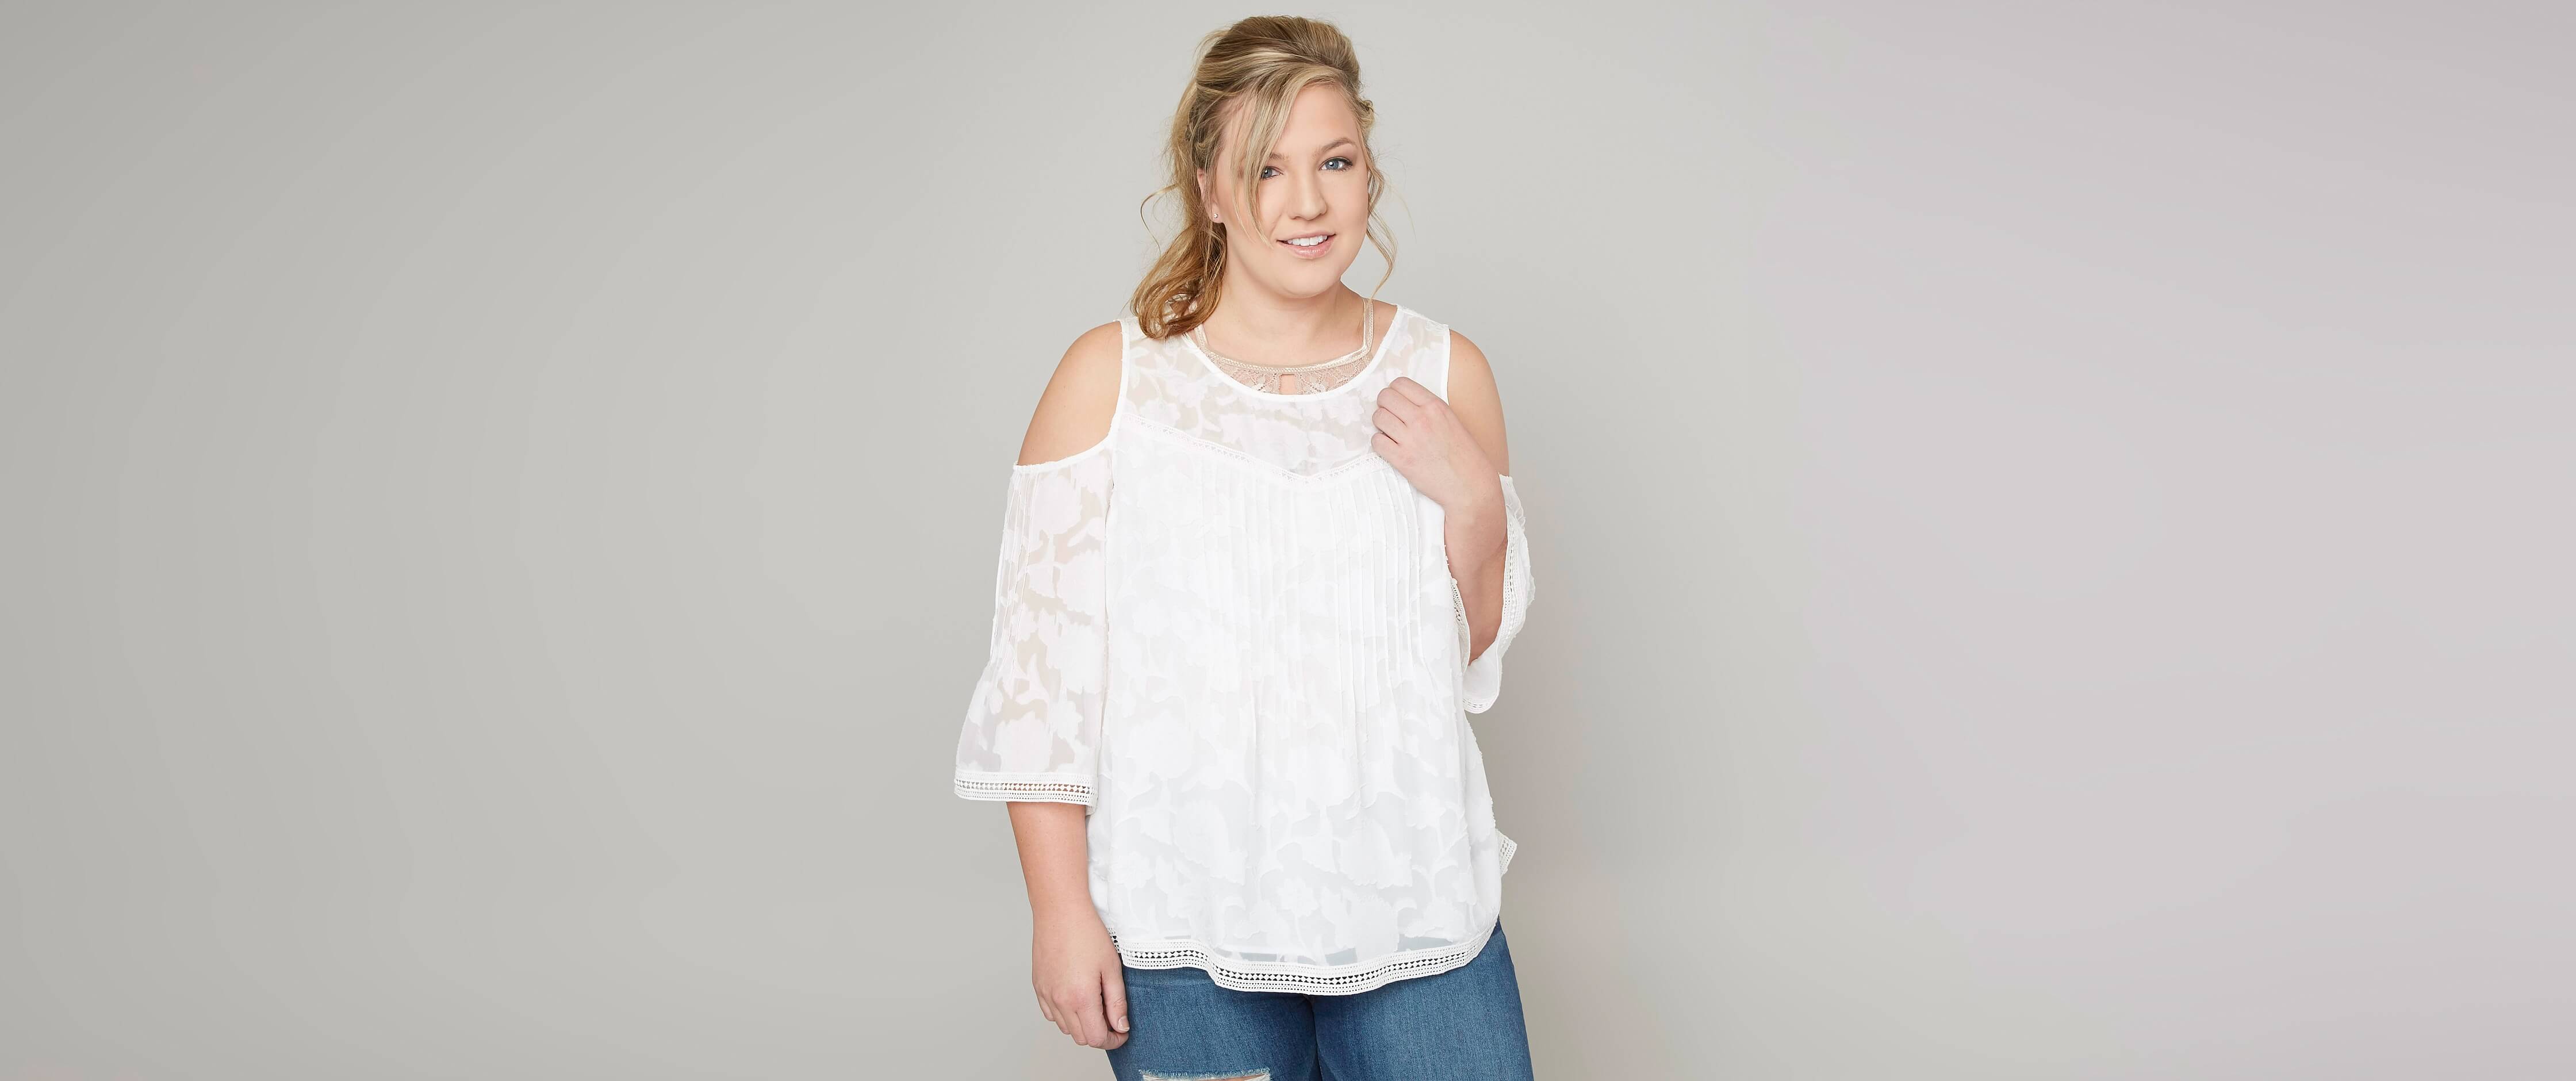 plus size lucky brand